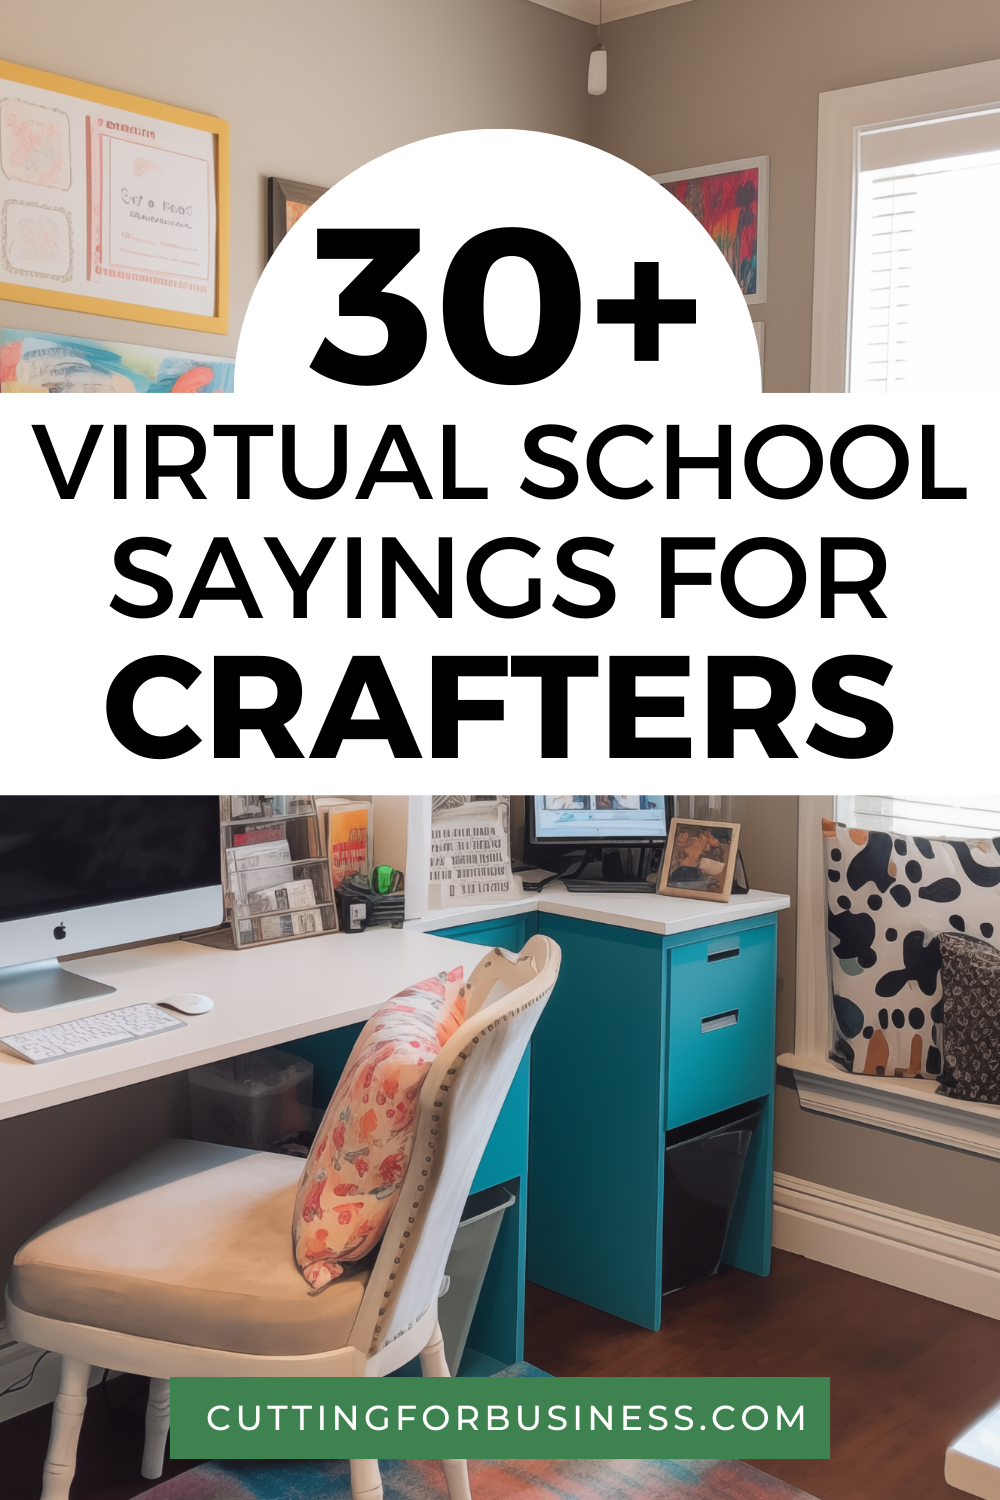 30+ Virtual Back to School Sayings for Crafters - cuttingforbusiness.com